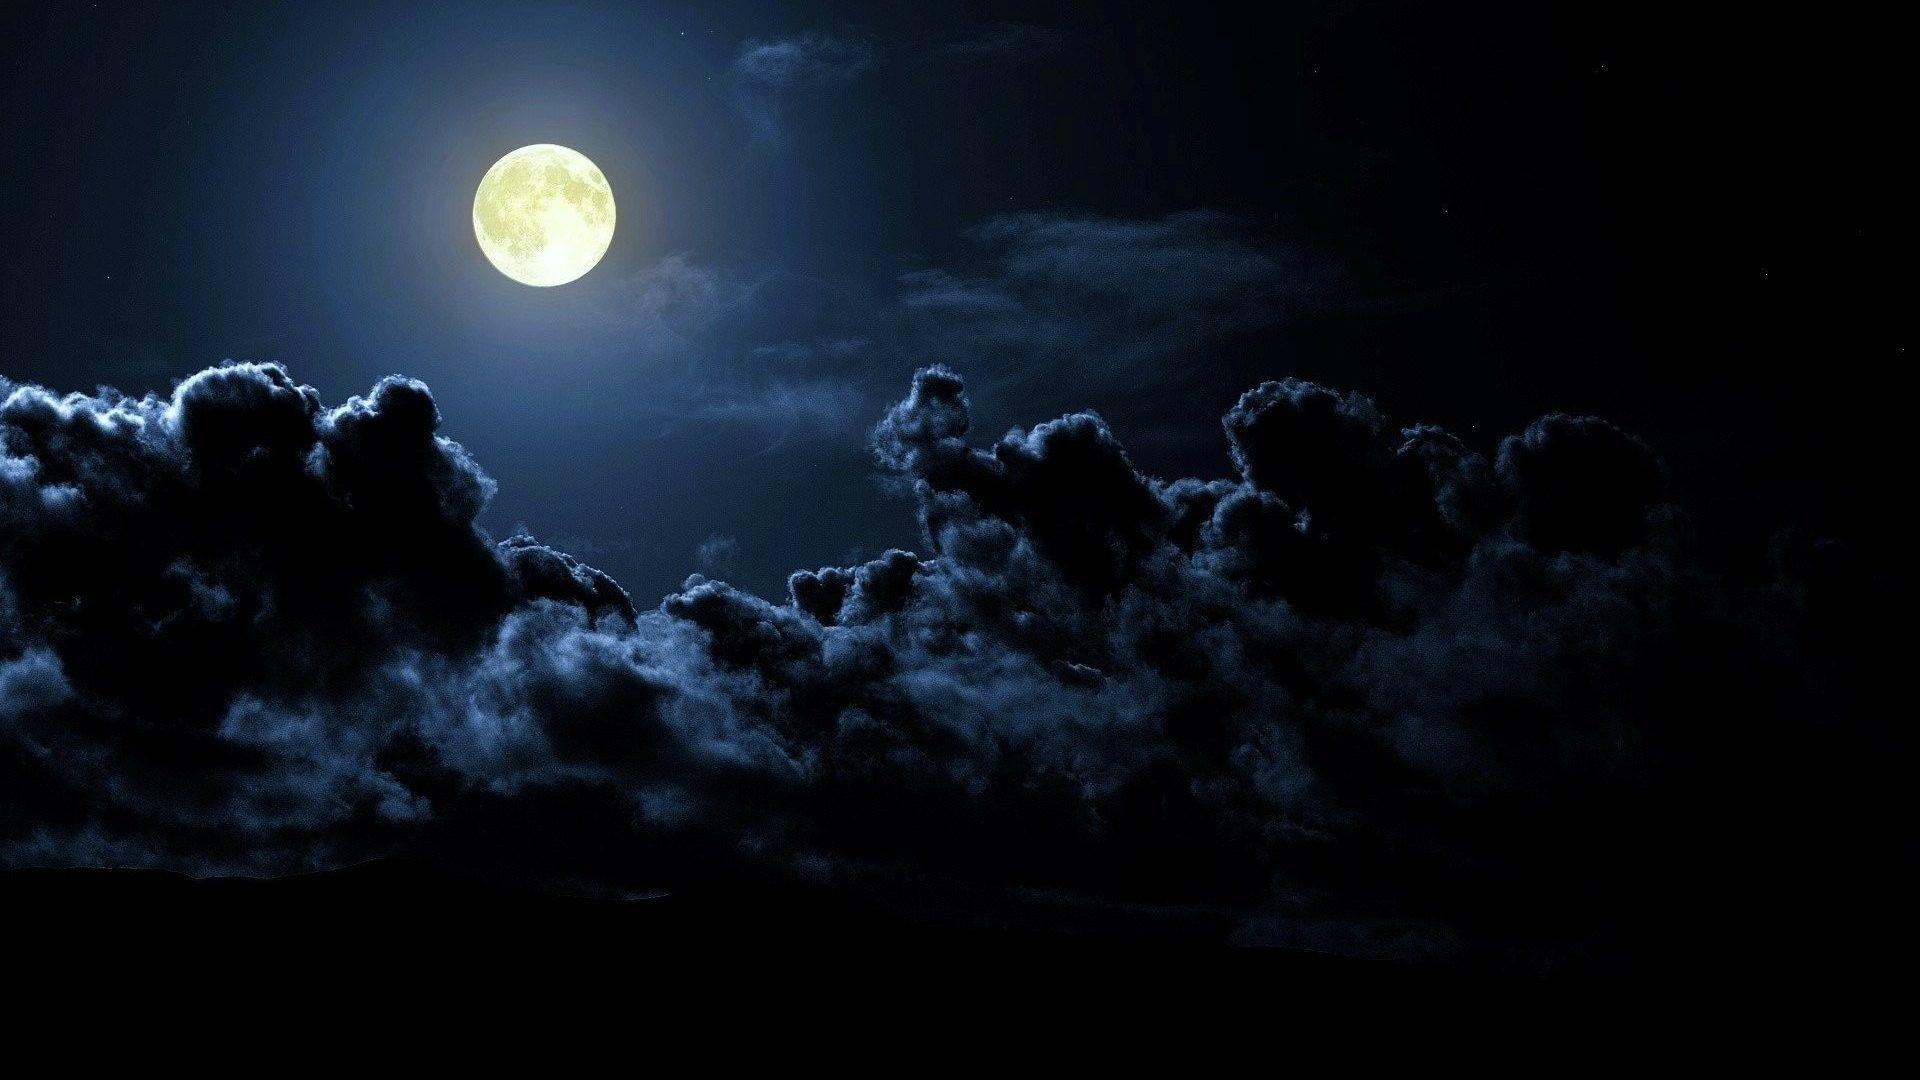 Sky: Night Beauty Moon Full Photo Nature Quotes for HD 16:9 High